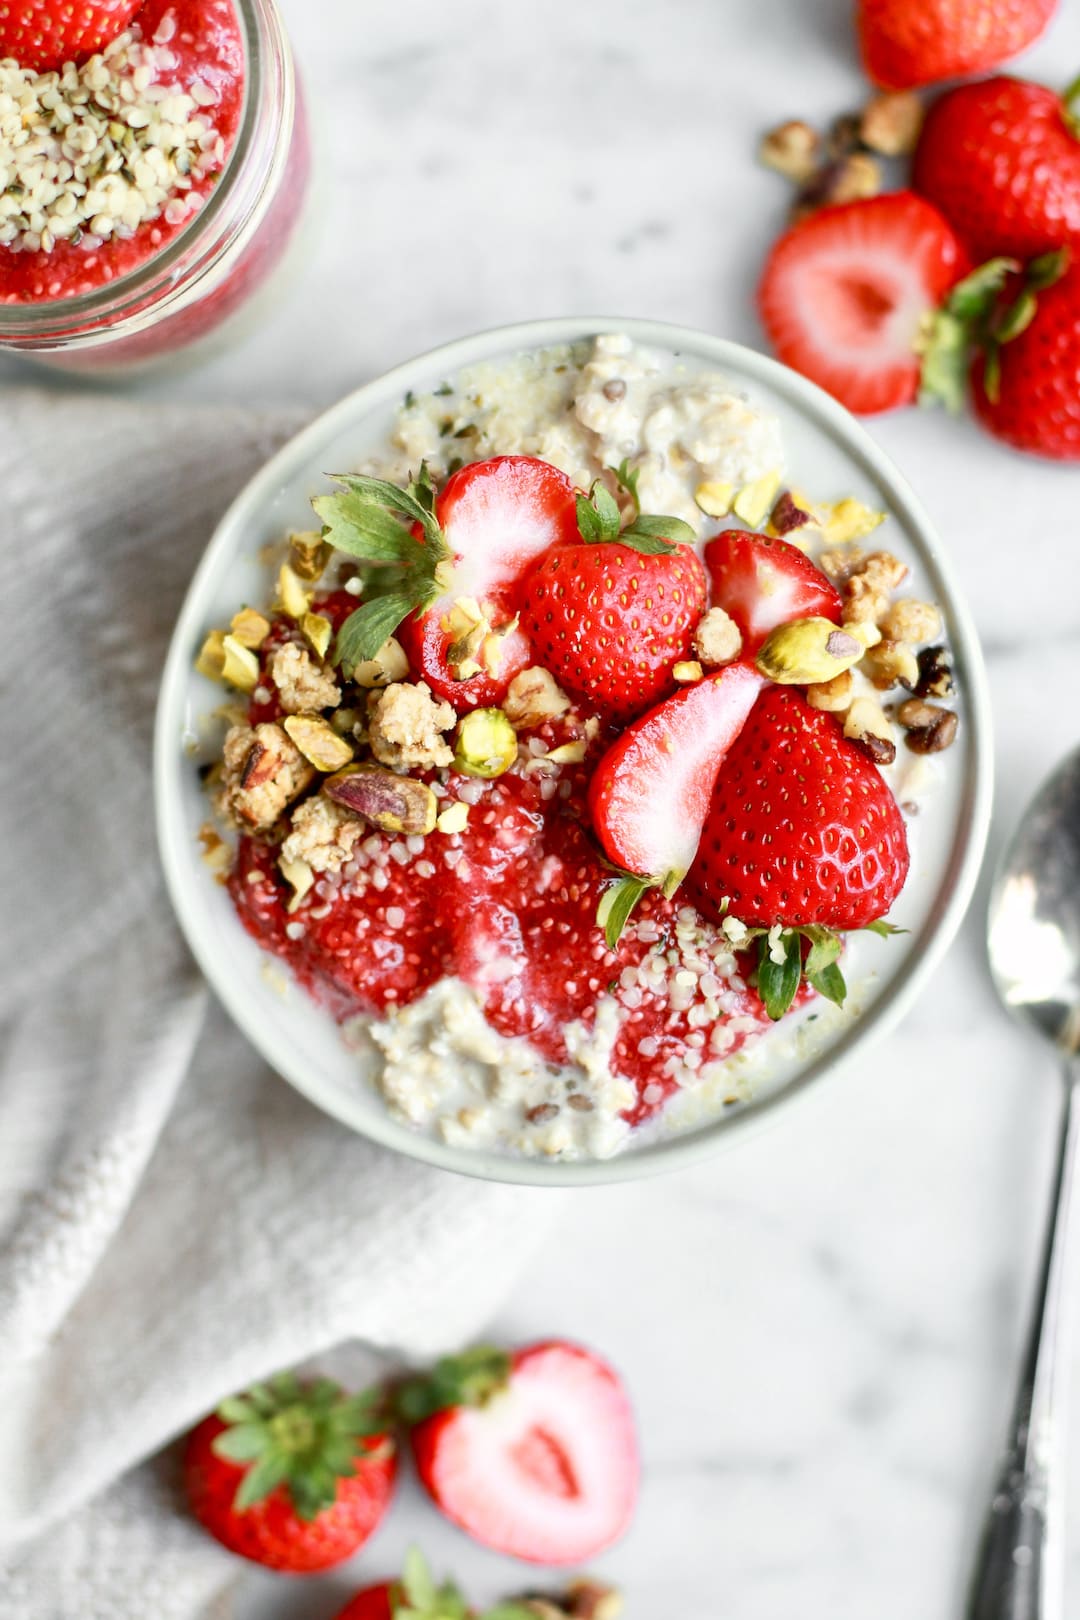 Healthy Strawberry Overnight Oats with Strawberry Chia Seed Jam - vegan, dairy free, gluten free